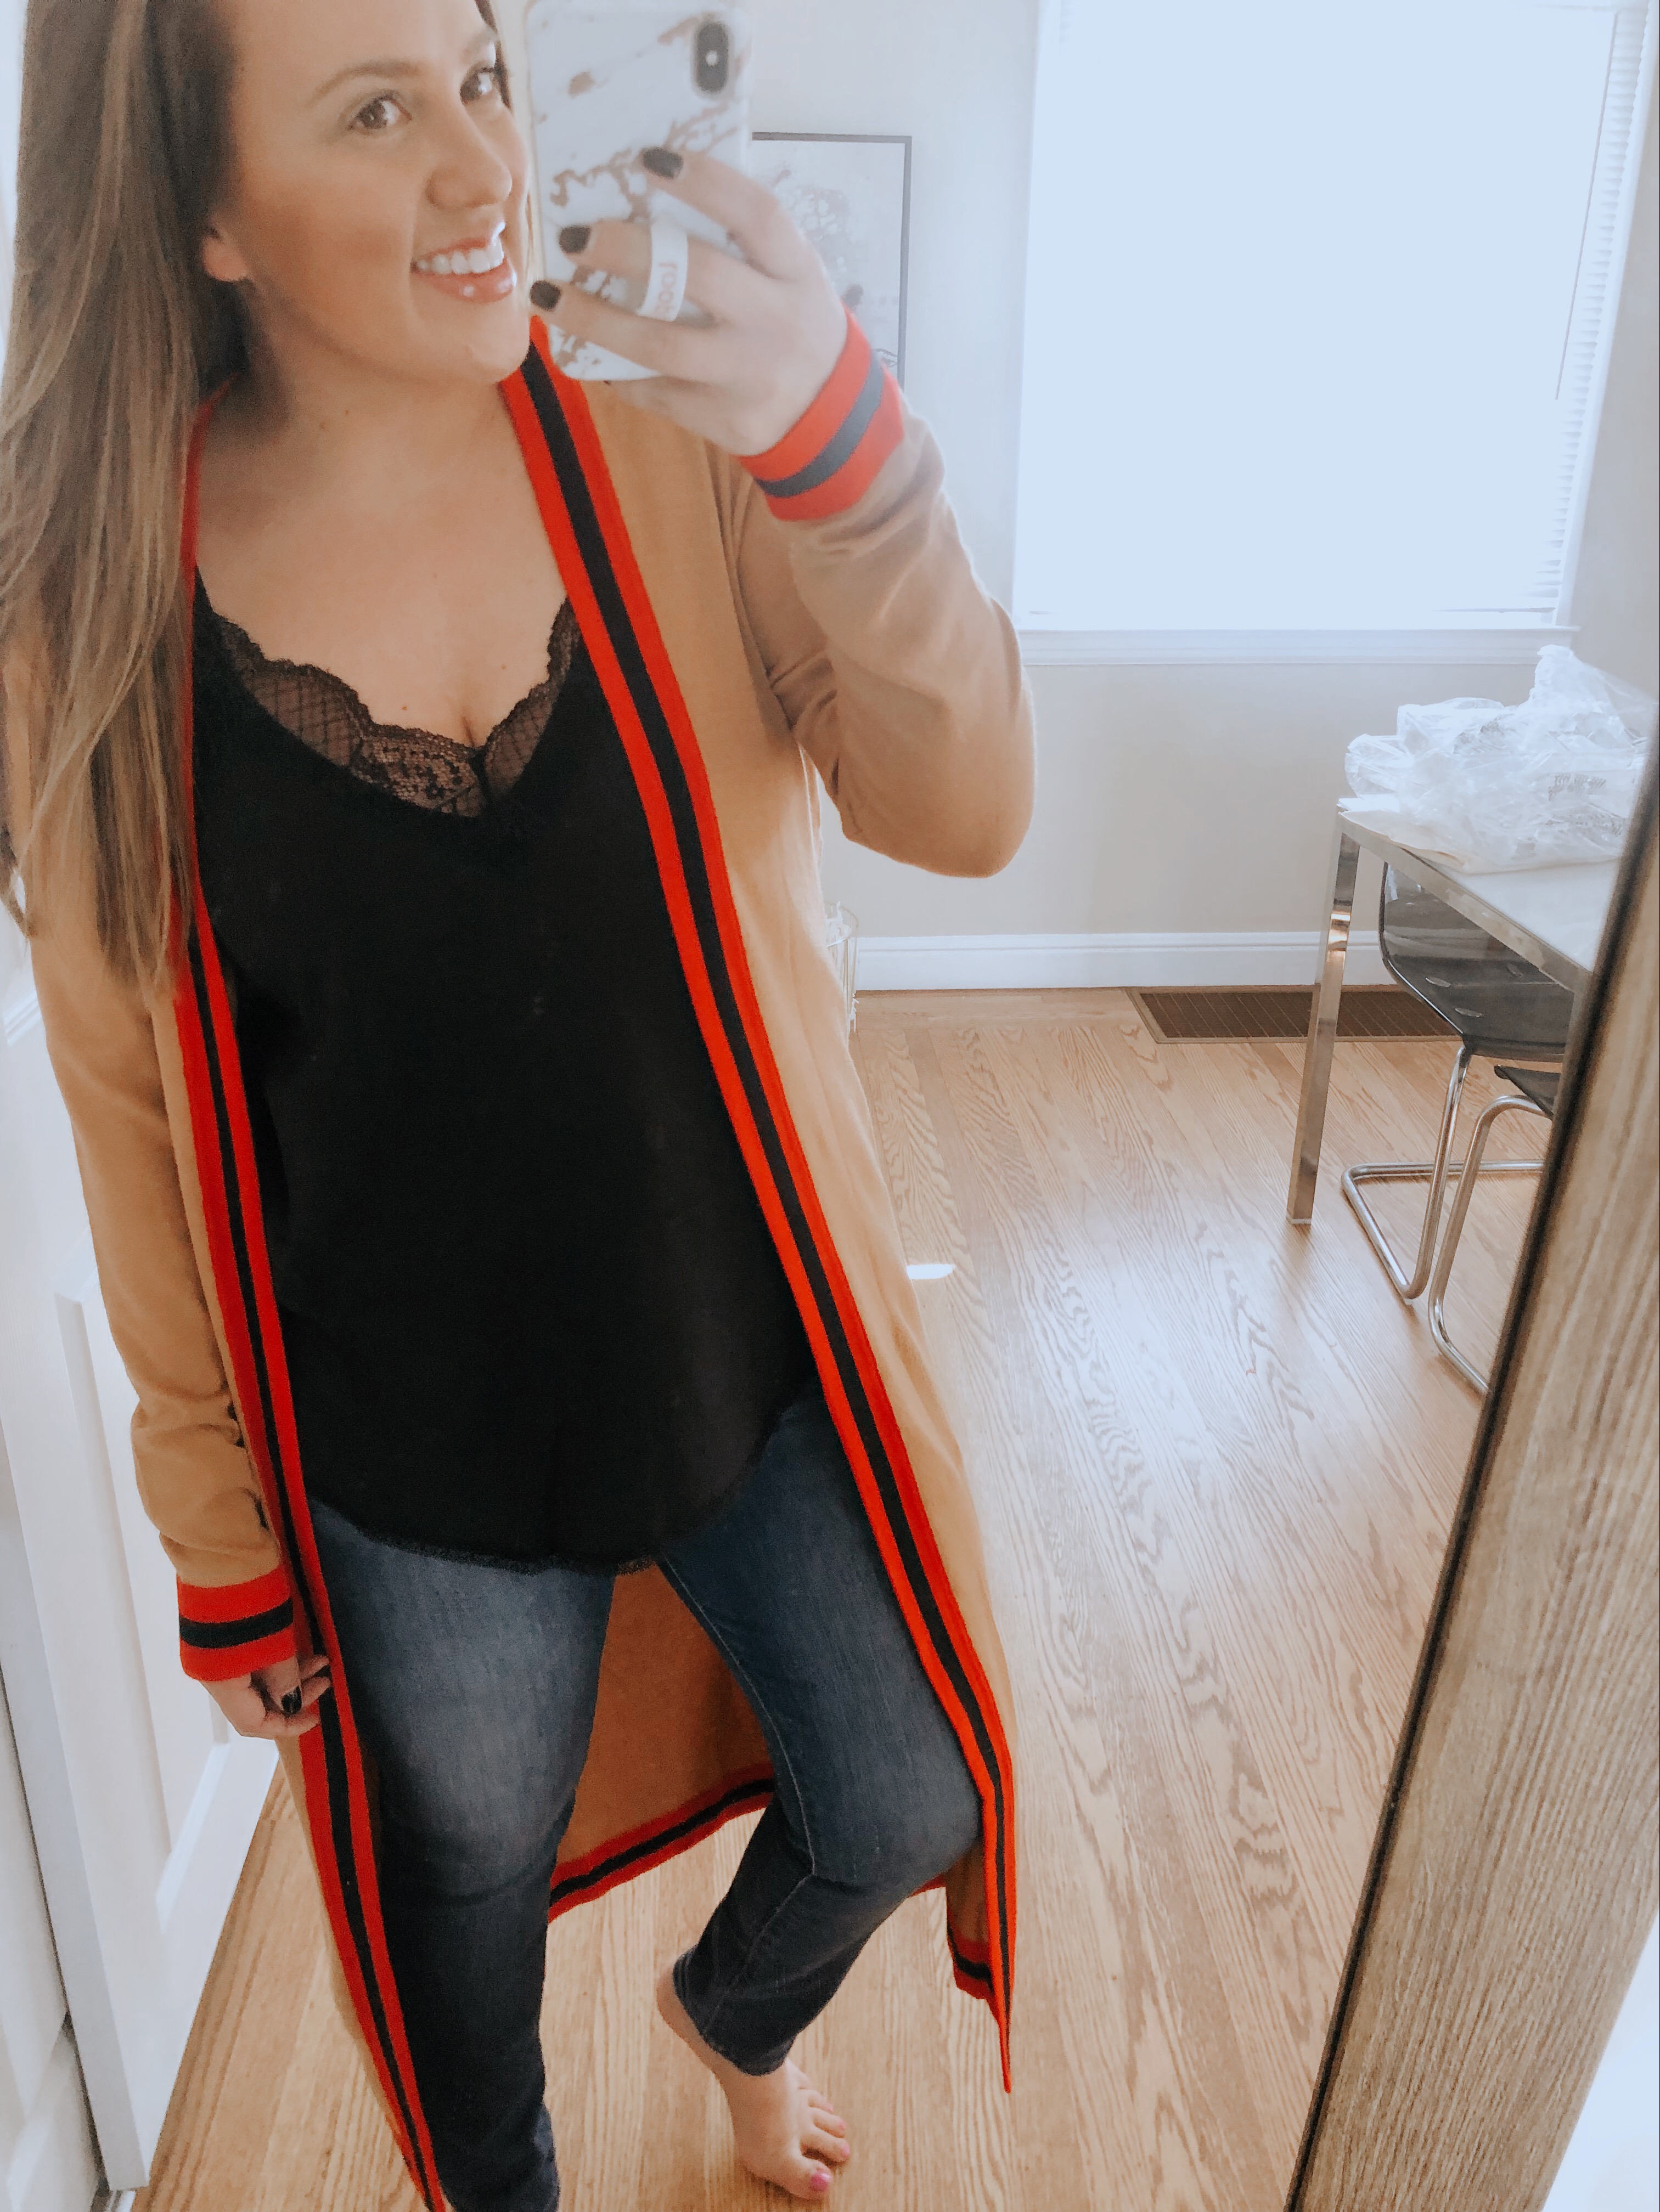 San Francisco blogger, Ashley Zeal, from Two Peas in a Prada shares her February Vici Try On Session. She is sharing all the fun spring staples from Vici. 